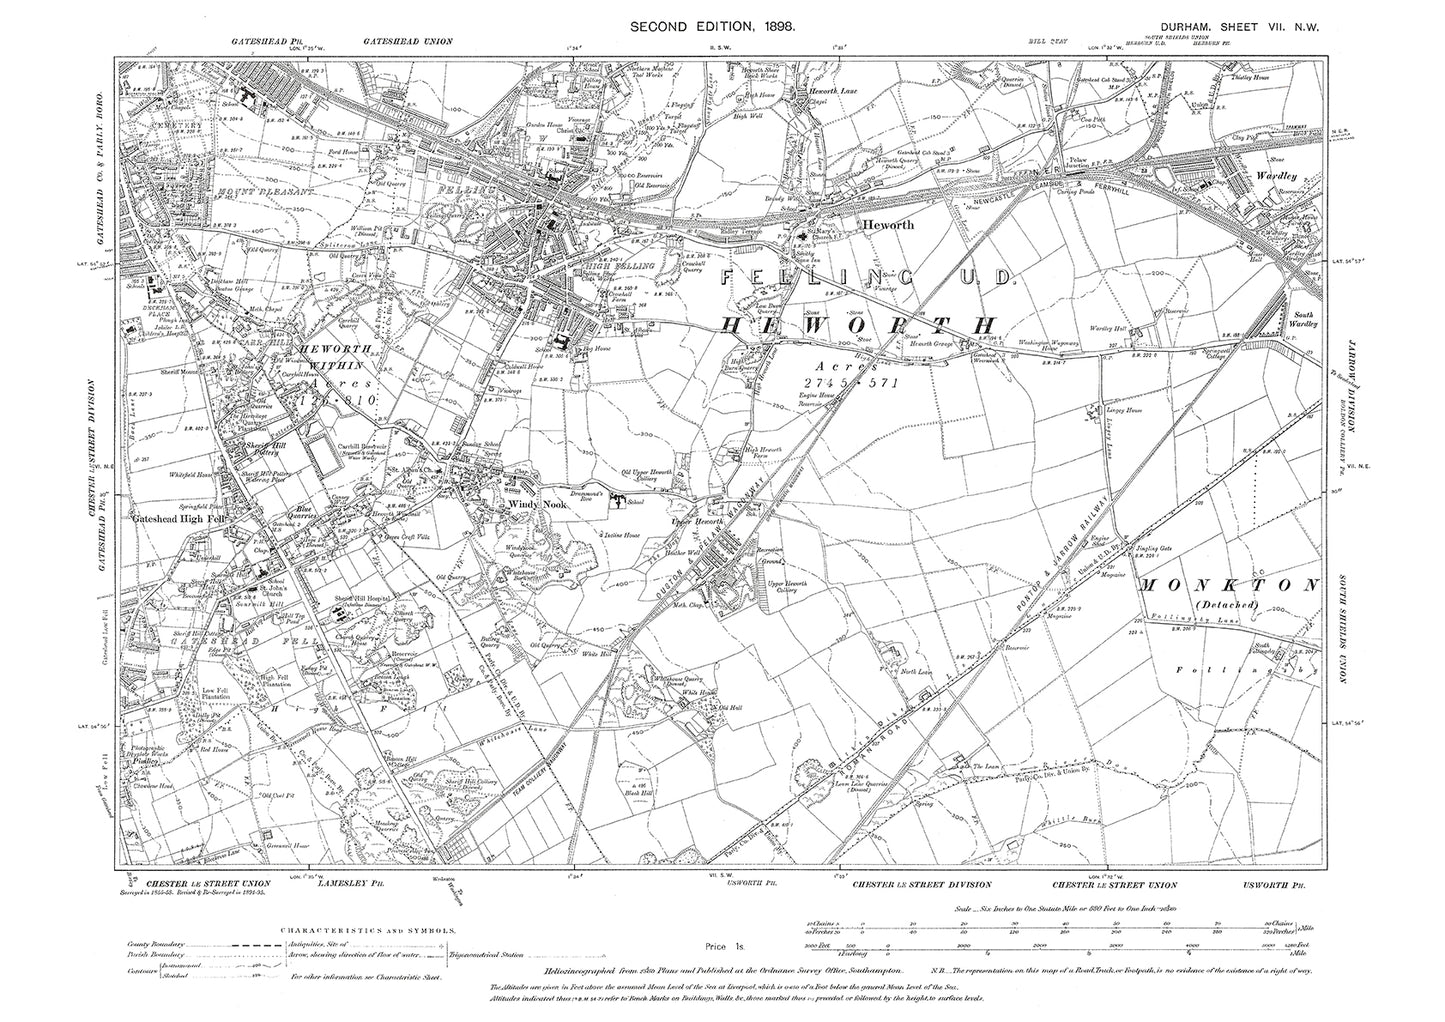 Old OS map dated 1898, showing Heworth and Windy Nook in Durham - 7NW